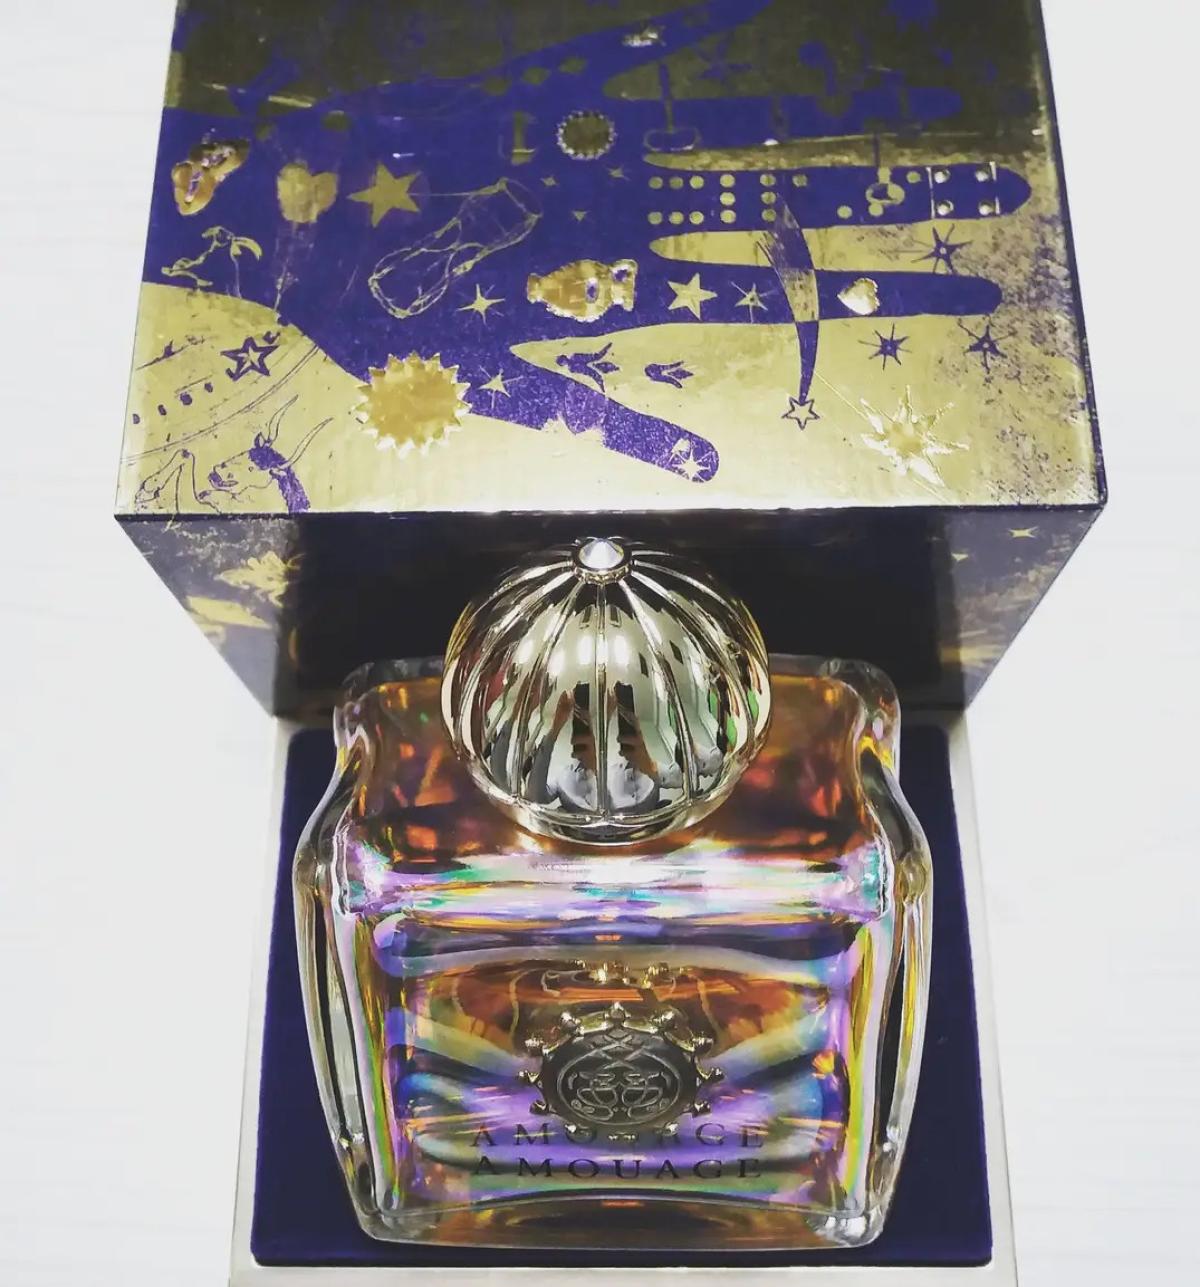 Fate for Women Amouage perfume - a fragrance for women 2013